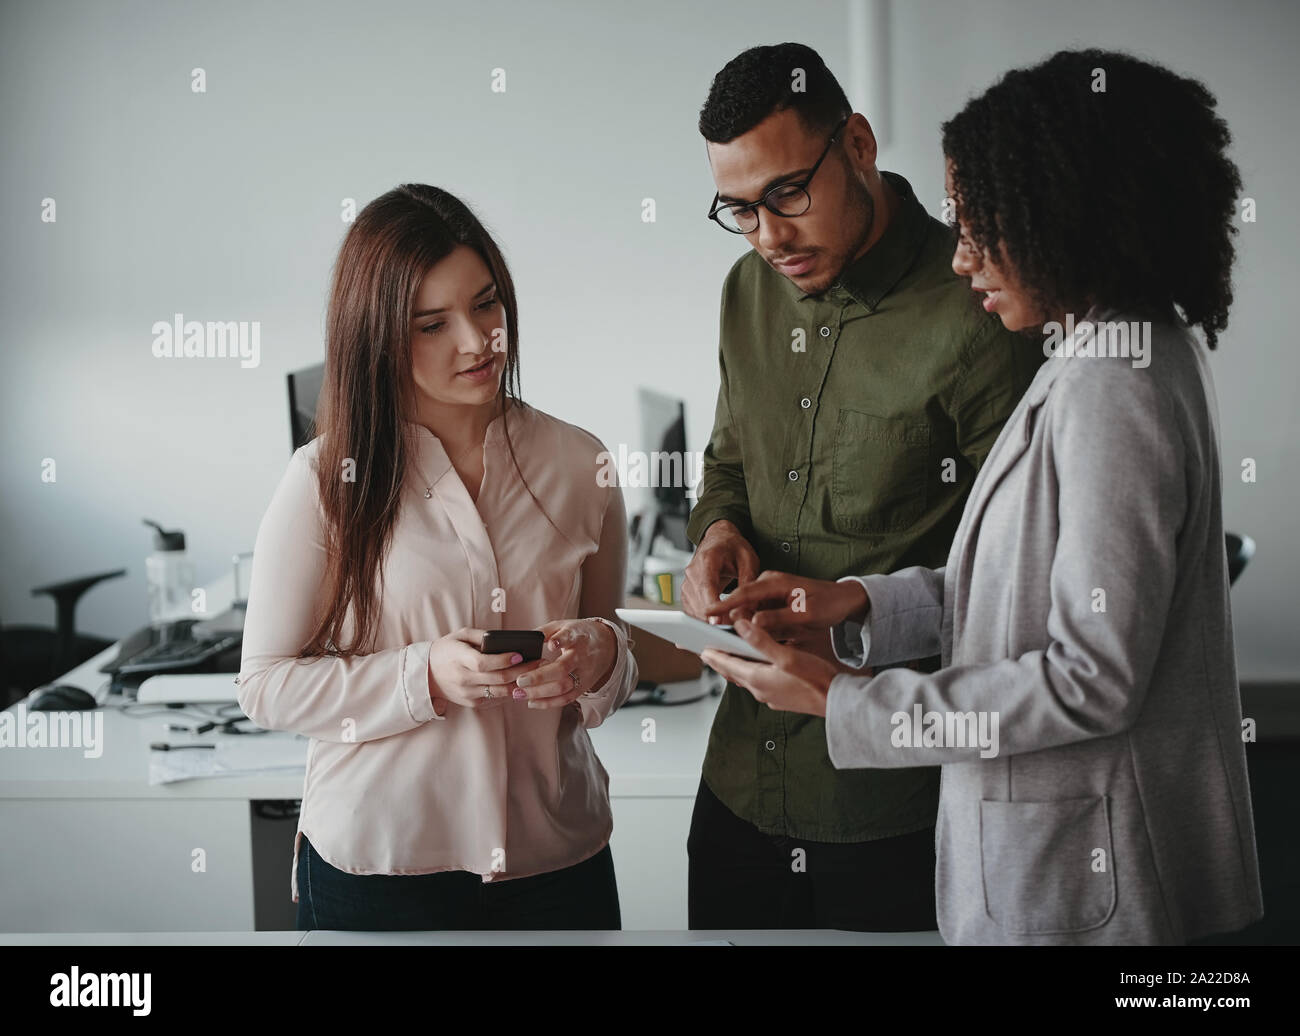 Group of multiethnic young concentrated businesspeople using digital tablet at workplace Stock Photo